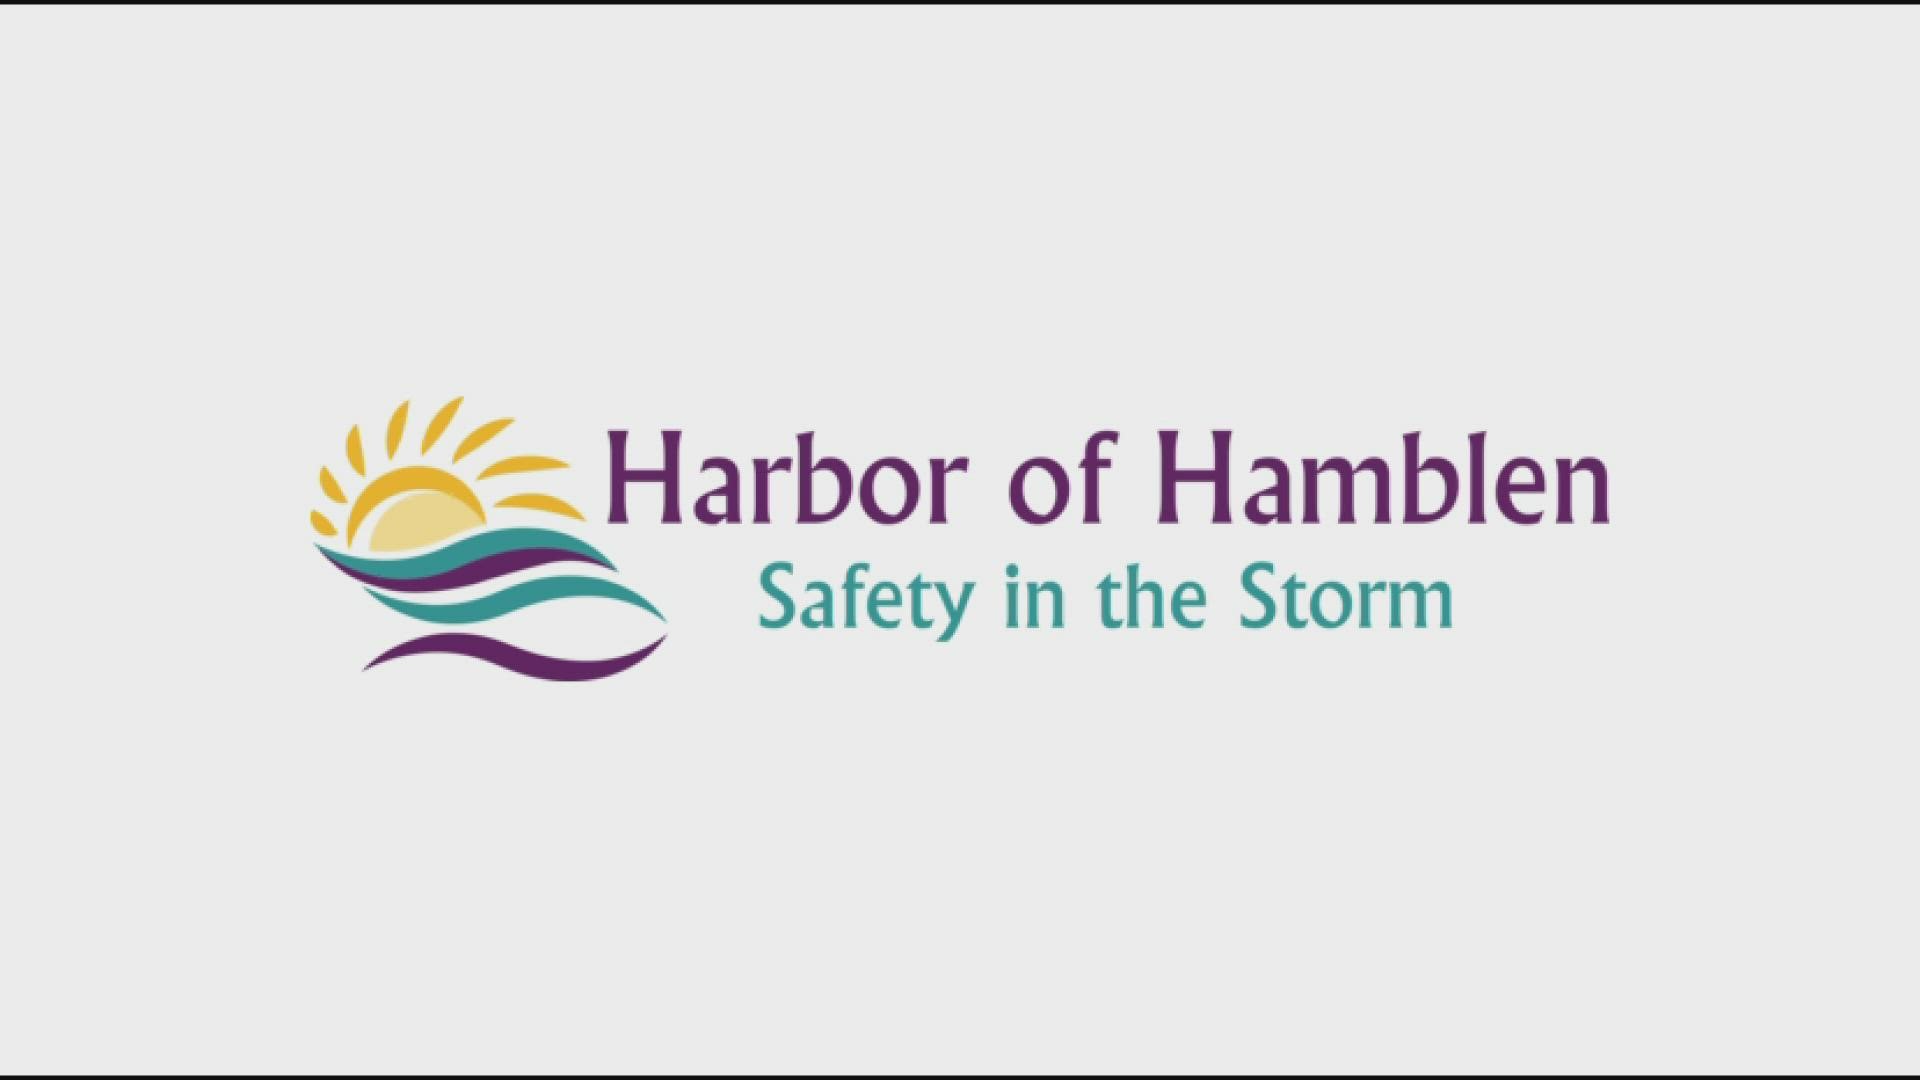 Harbor of Hamblen is officially closing on March 3, but survivors will still be able to find advocacy services through the McNabb Center.